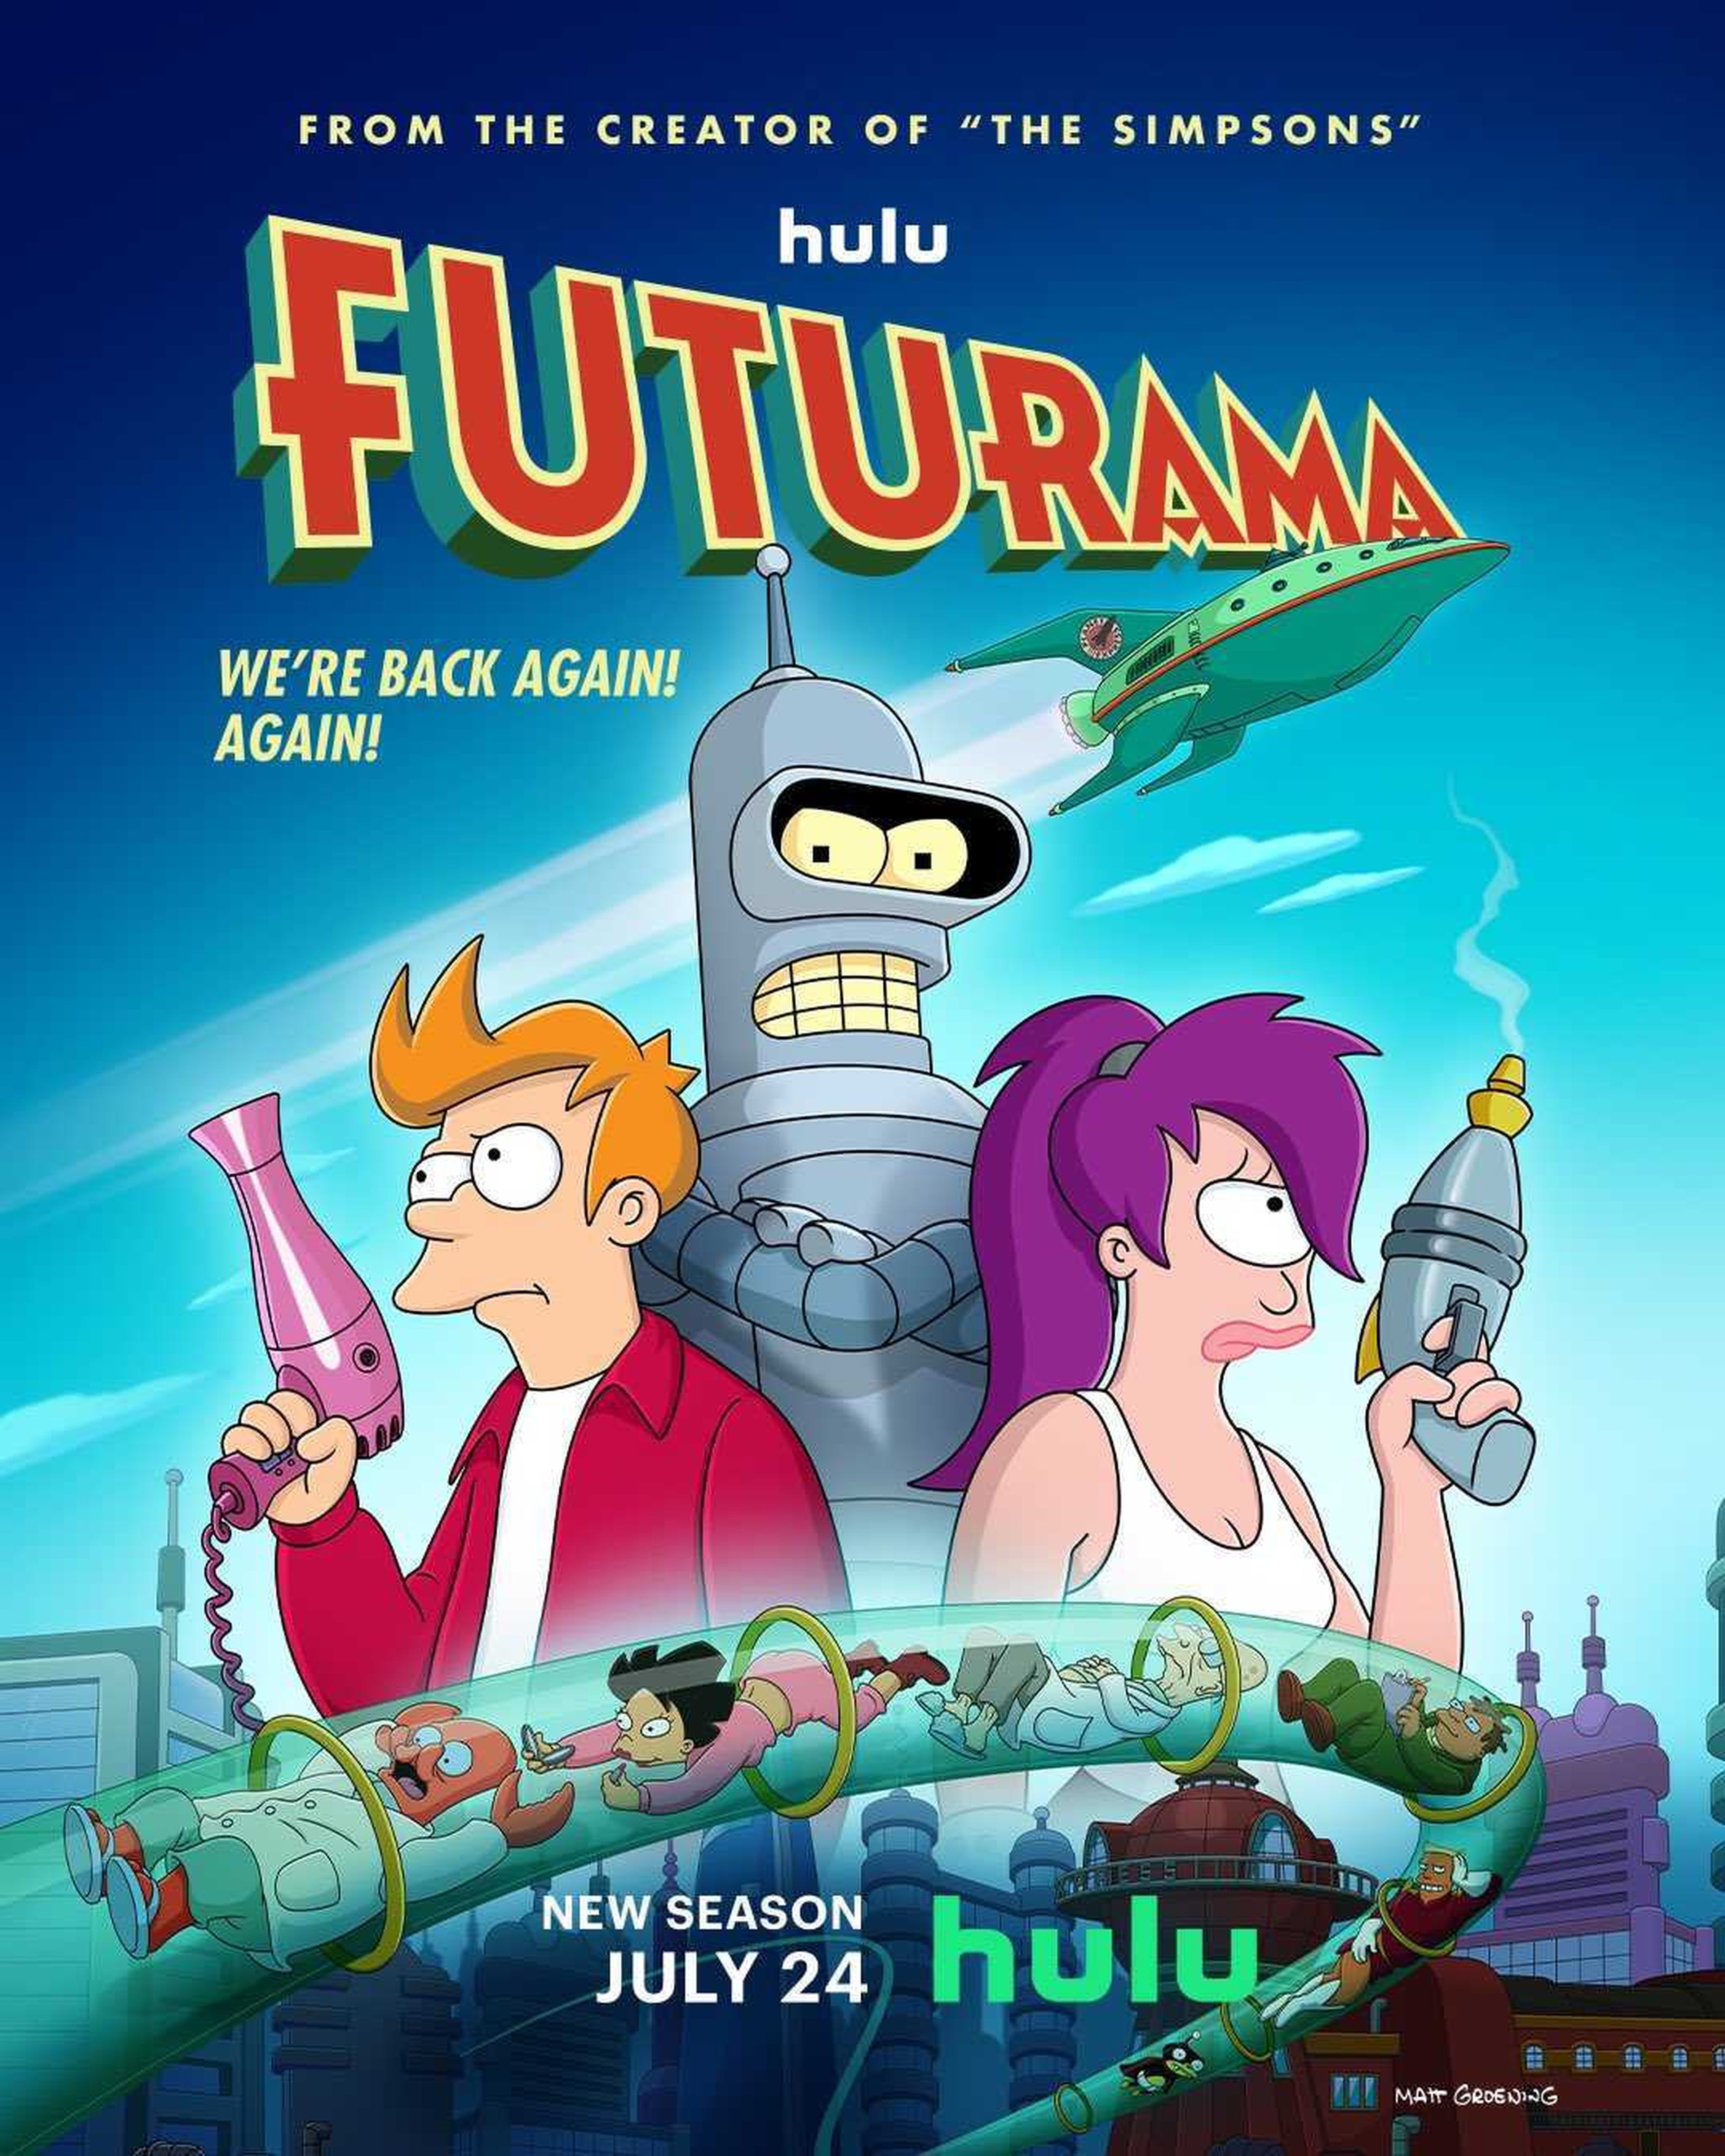 Official poster and trailer for the new season of Futurama, which lands